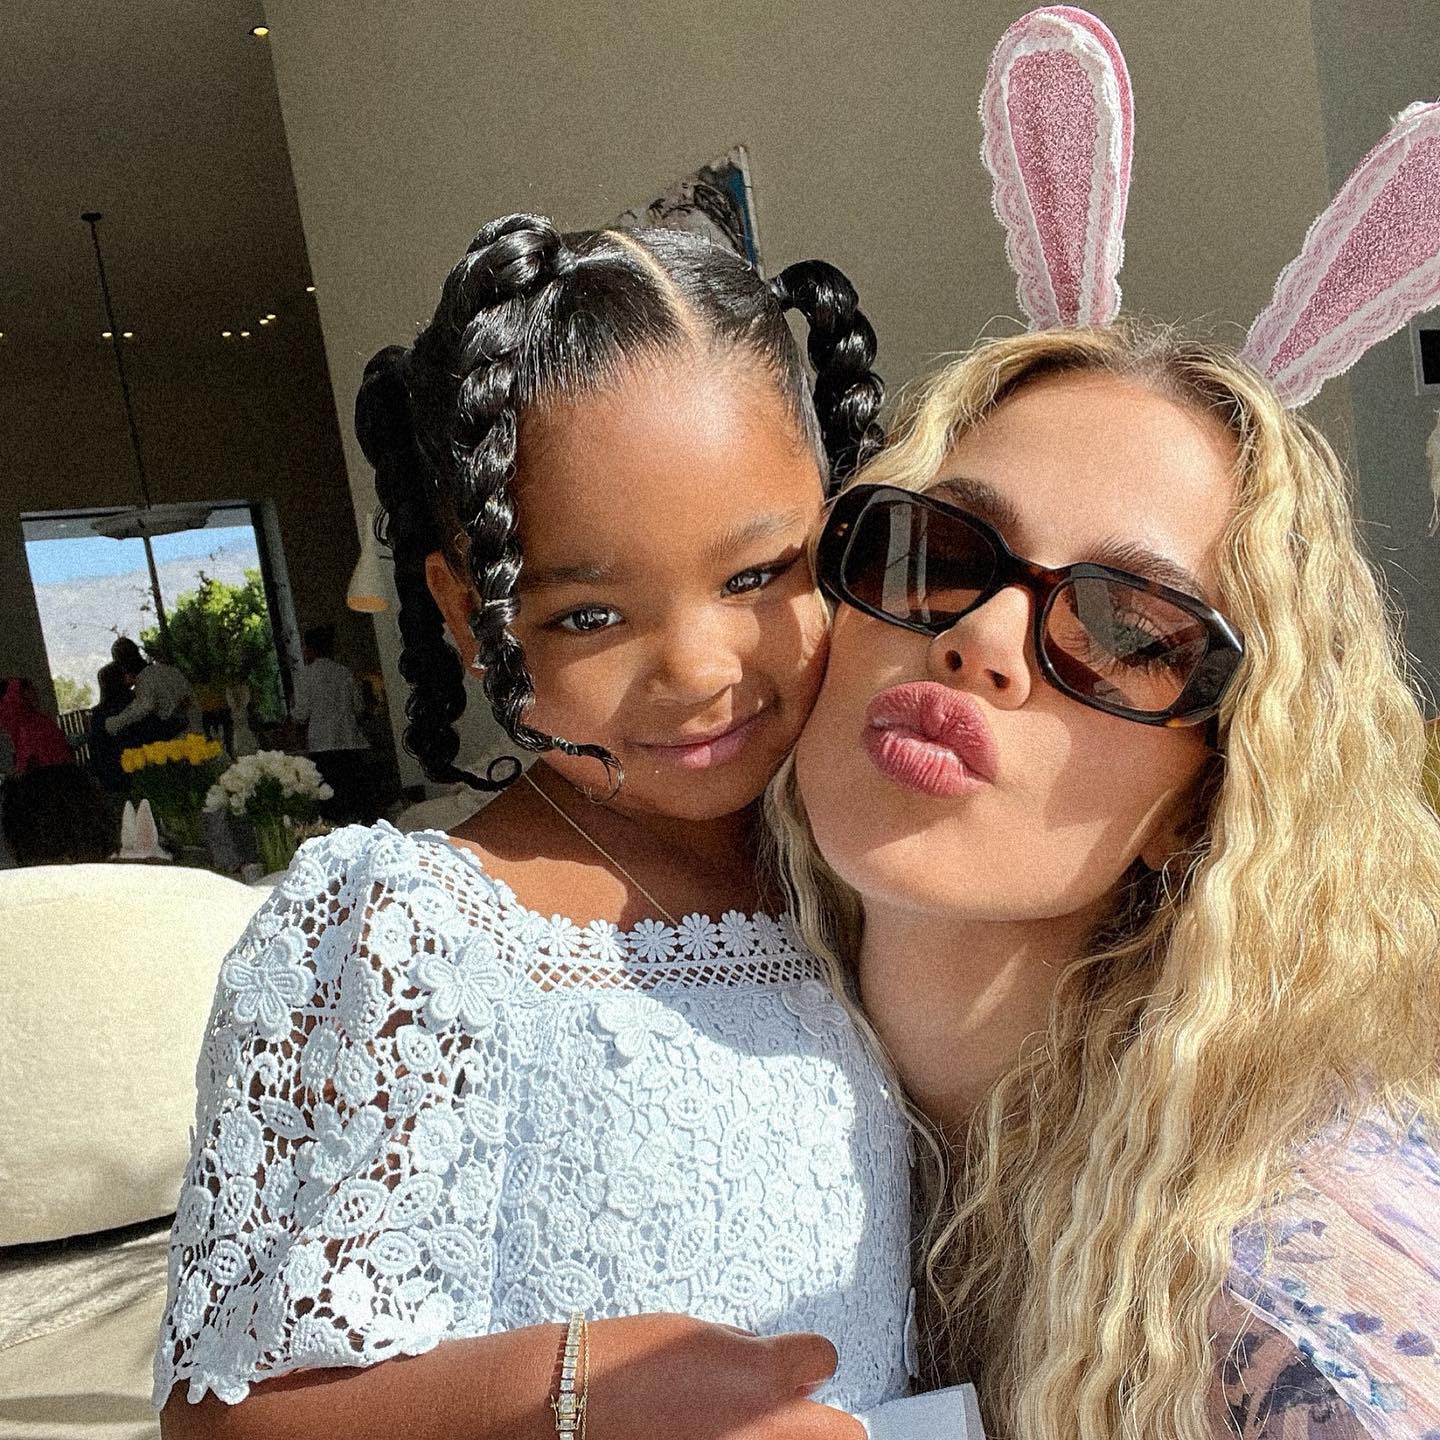 Khloe Kardashian slammed for editing new pic of daughter True, 4, after she admitted to major photoshop fail | The Sun